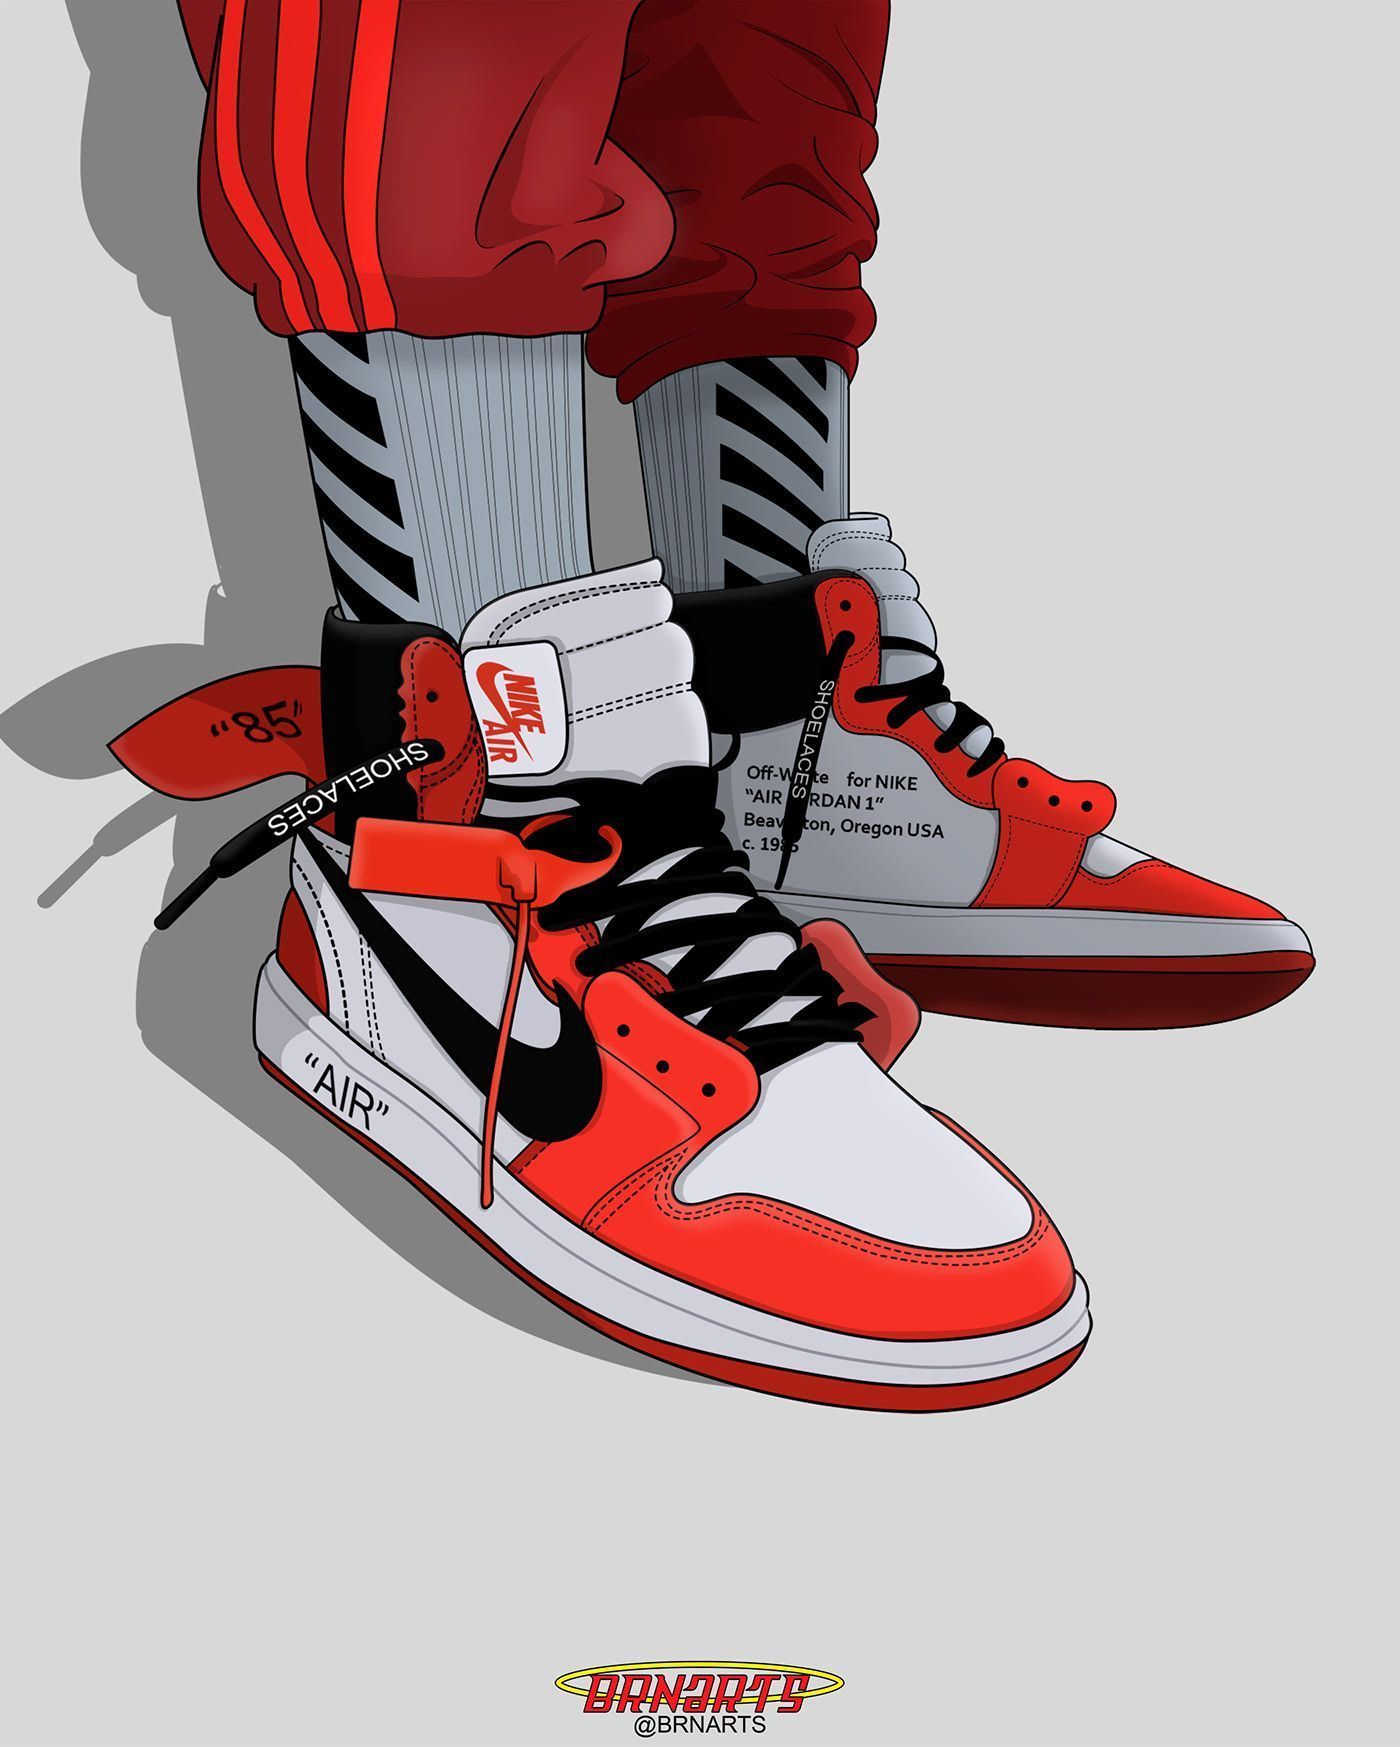 Off White x Air Jordan 1, an illustration of a pair of sneakers - Nike, shoes